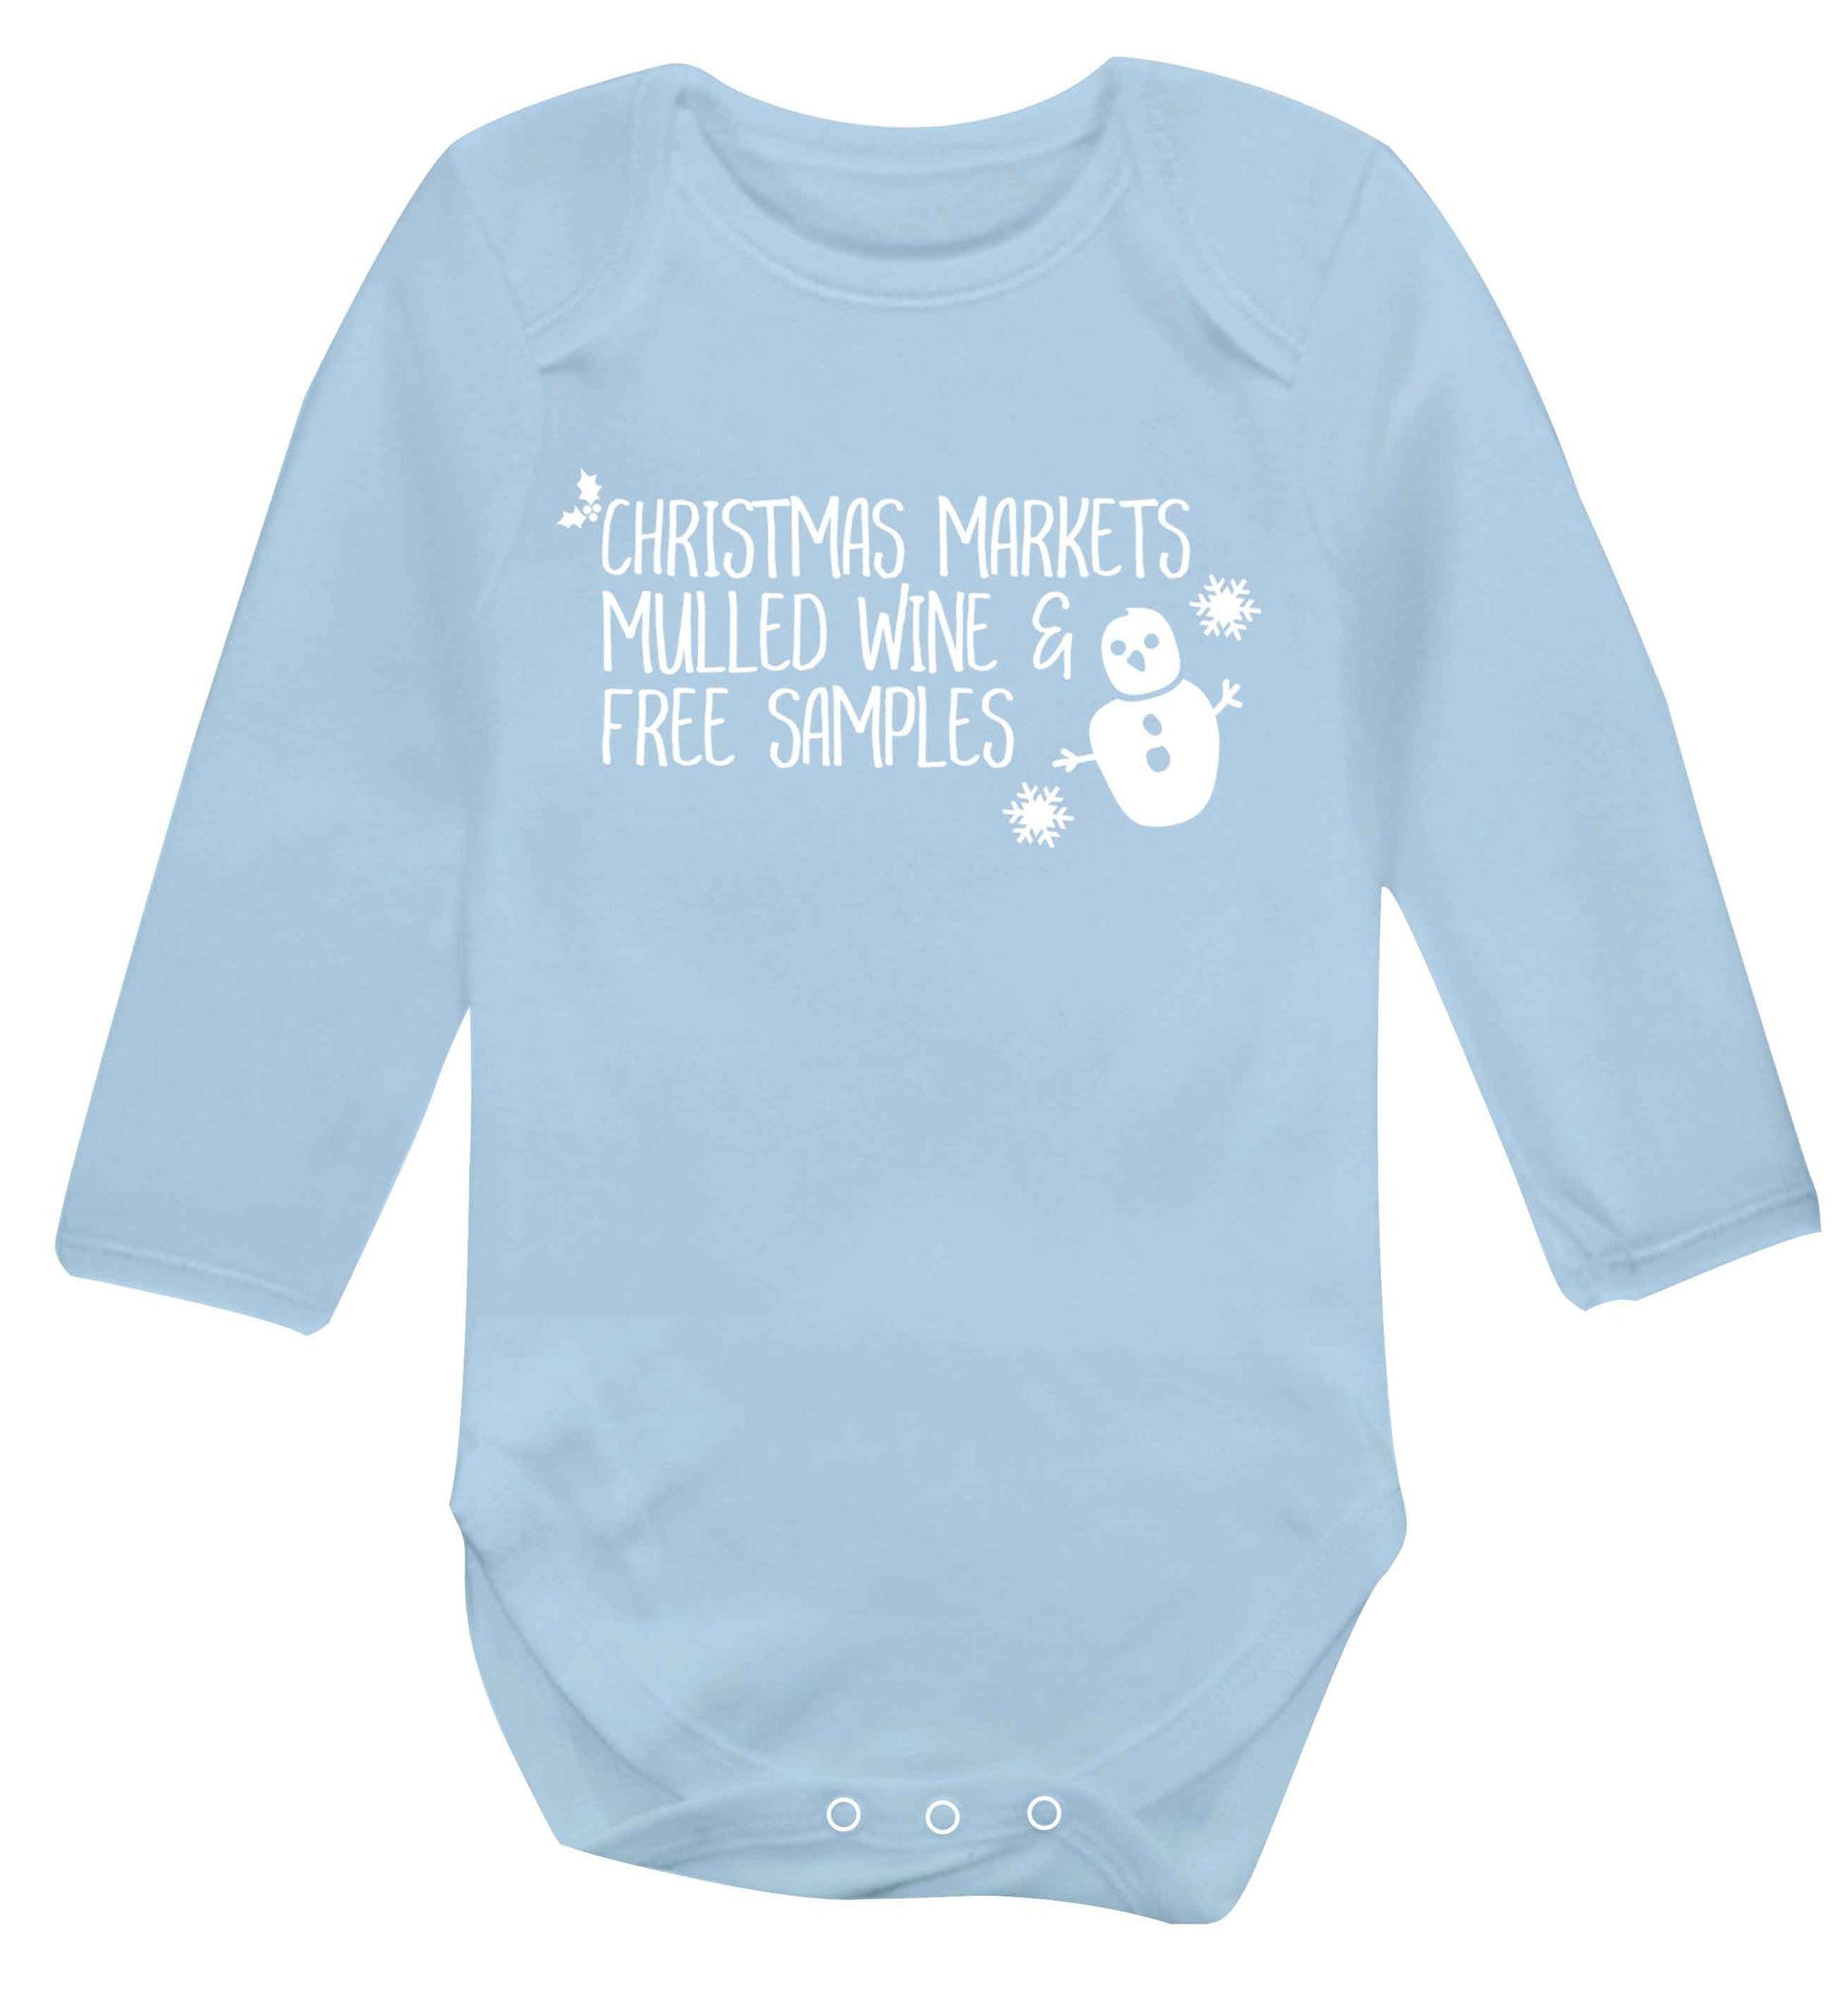 Christmas market mulled wine & free samples Baby Vest long sleeved pale blue 6-12 months